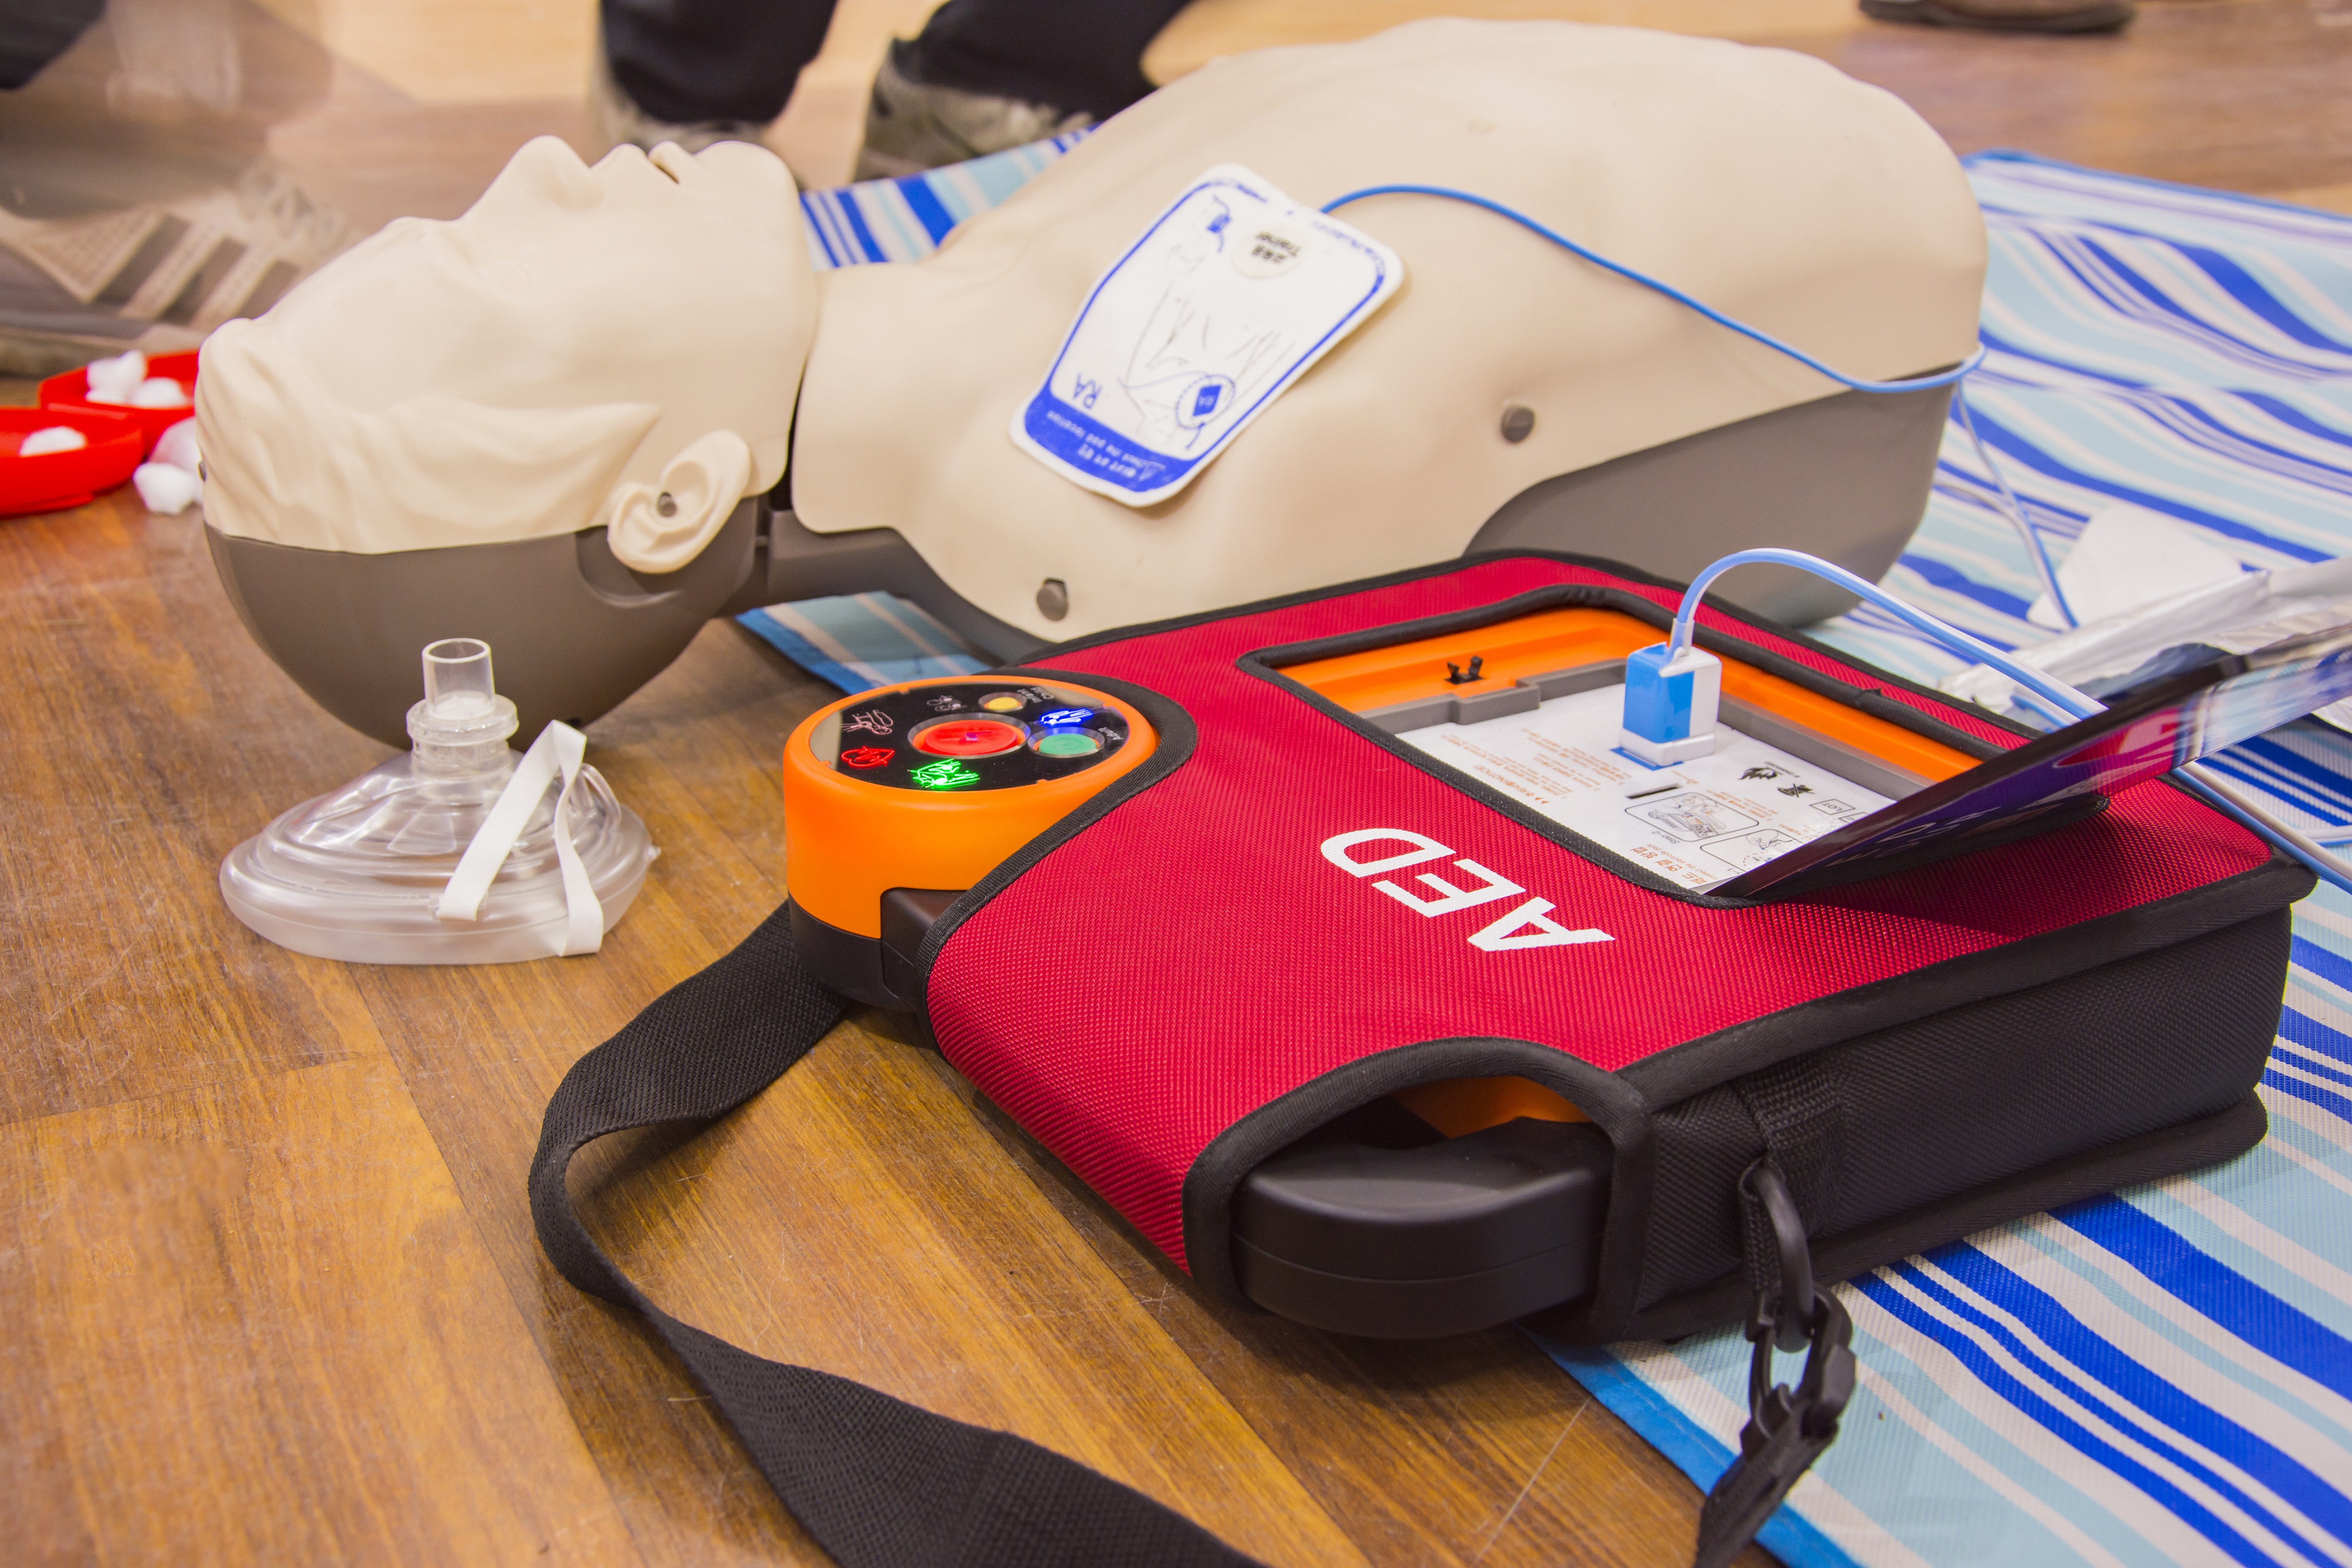 CPR AED First Aid Training Class August 13, 2022 in Salem